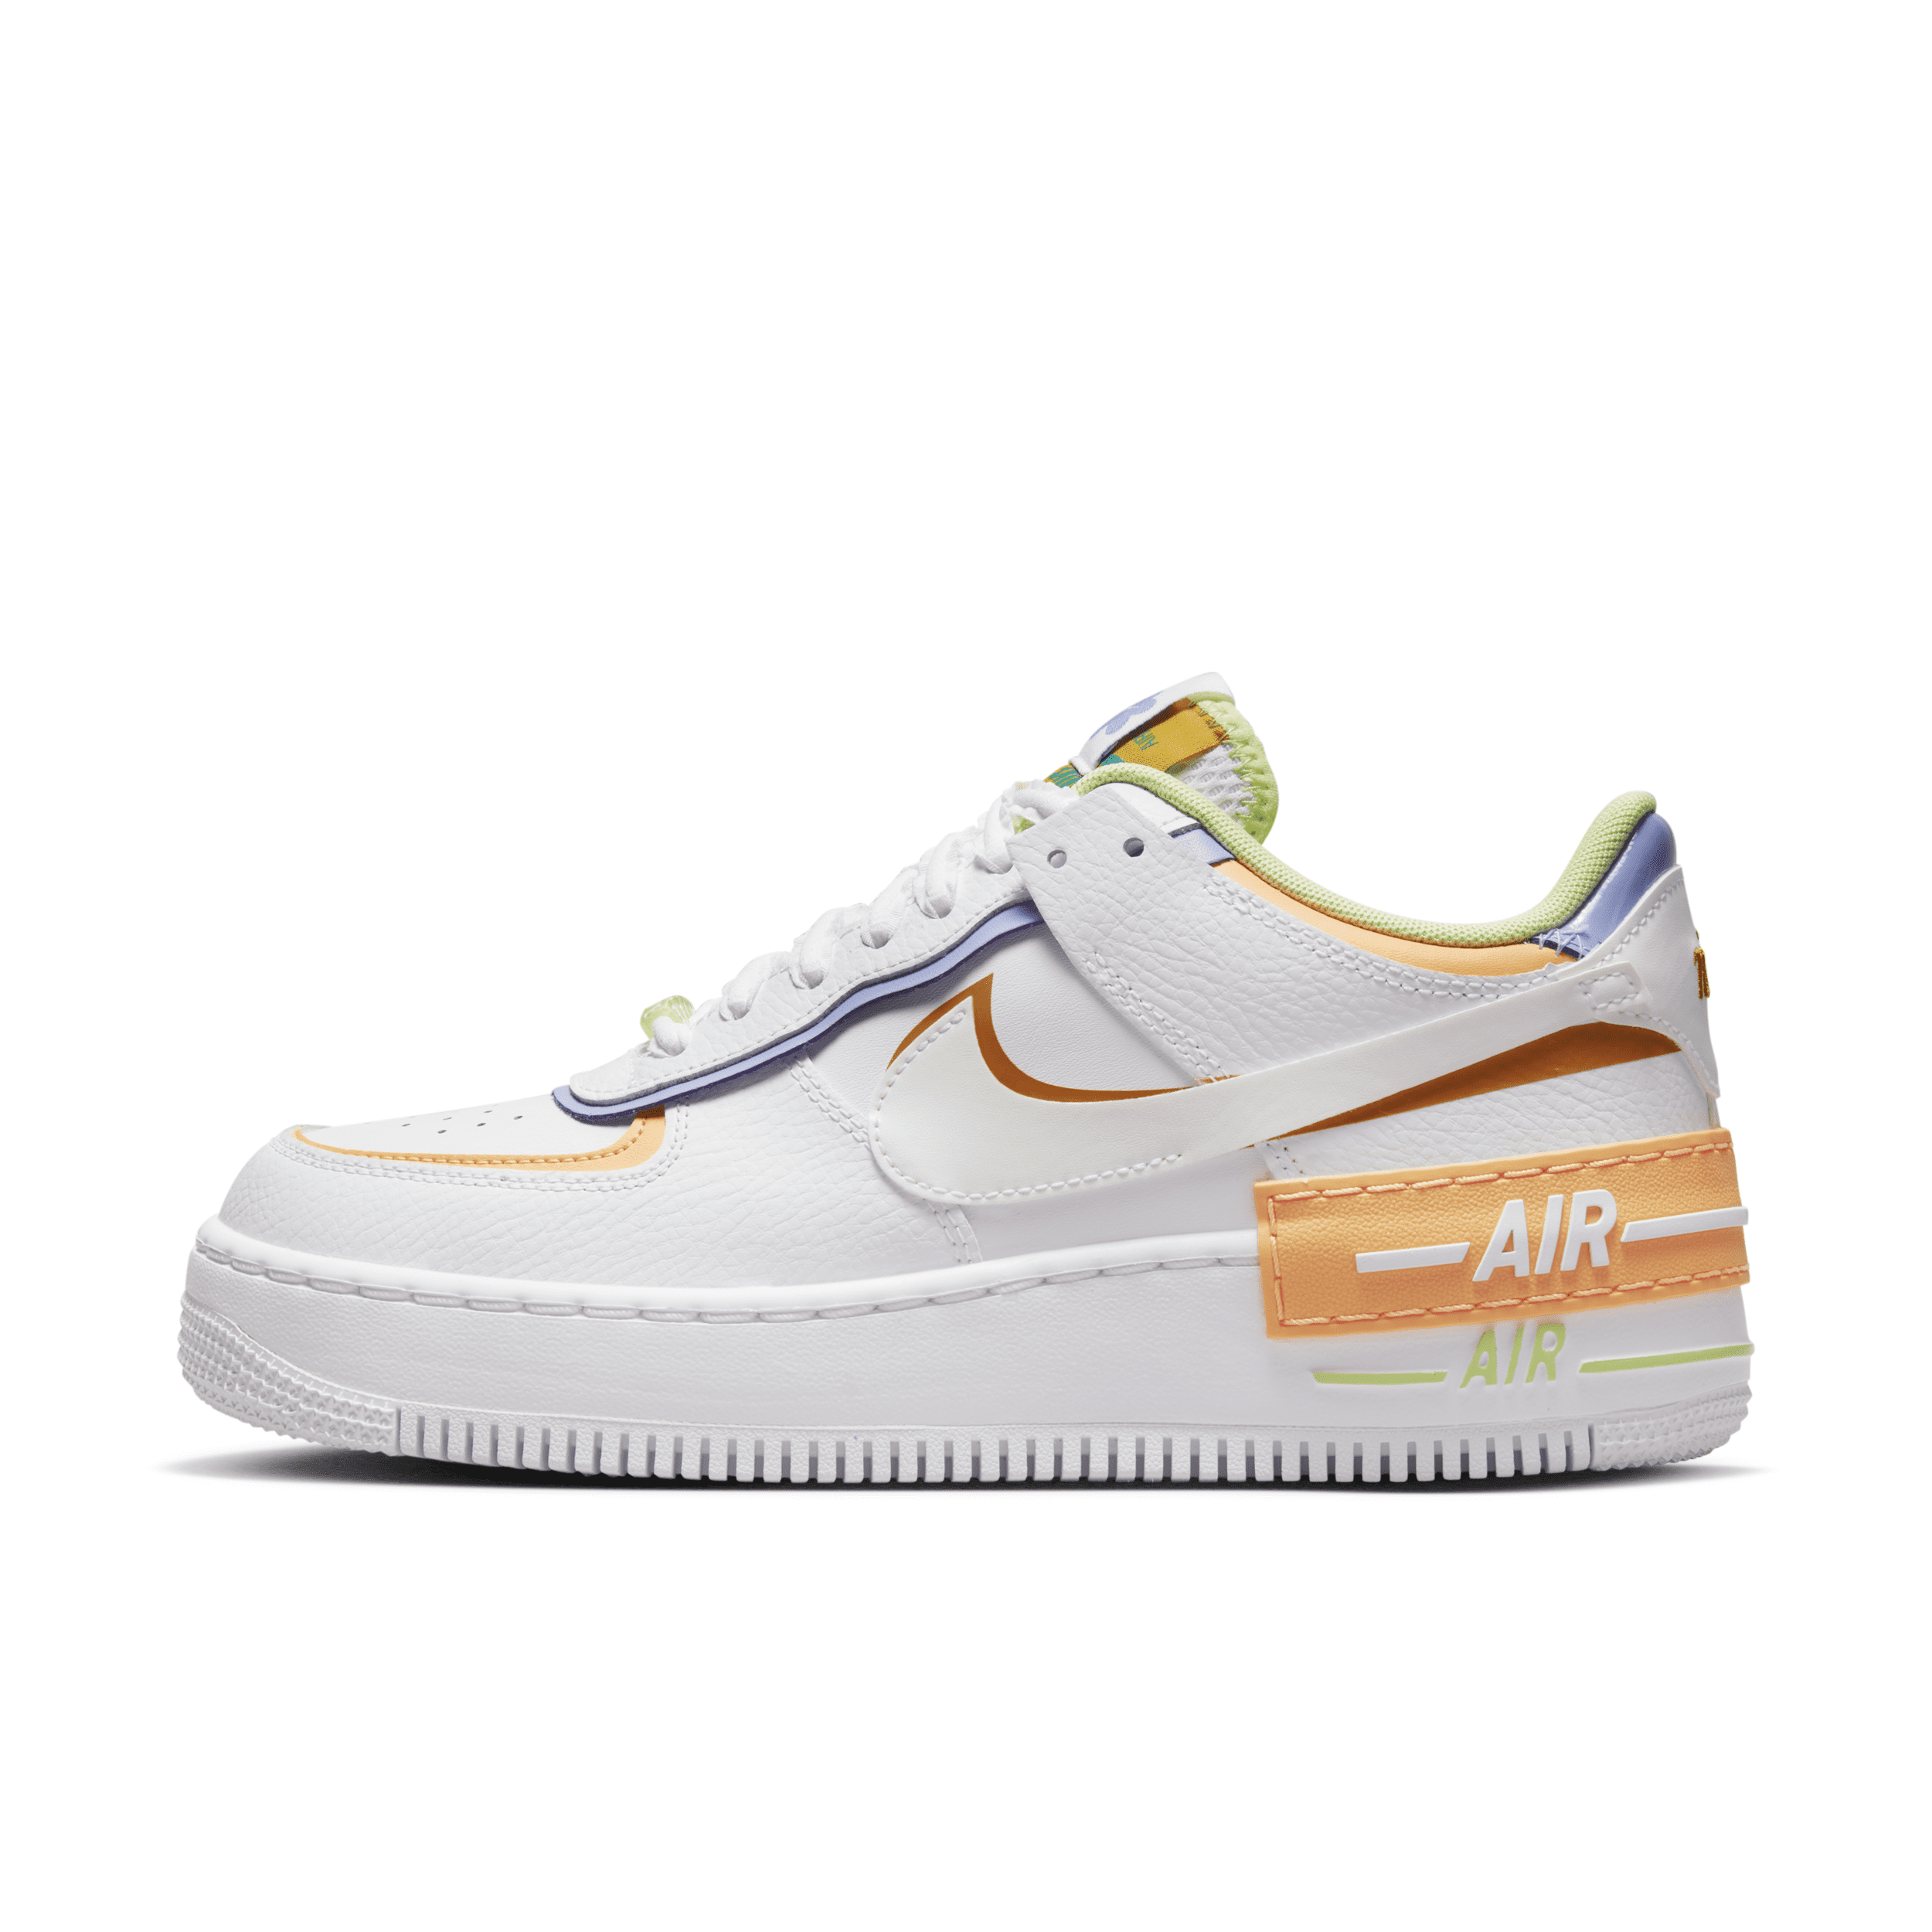 Nike Women's Air Force 1 Shadow Shoes in White, Size: 10.5 | DX3718-100